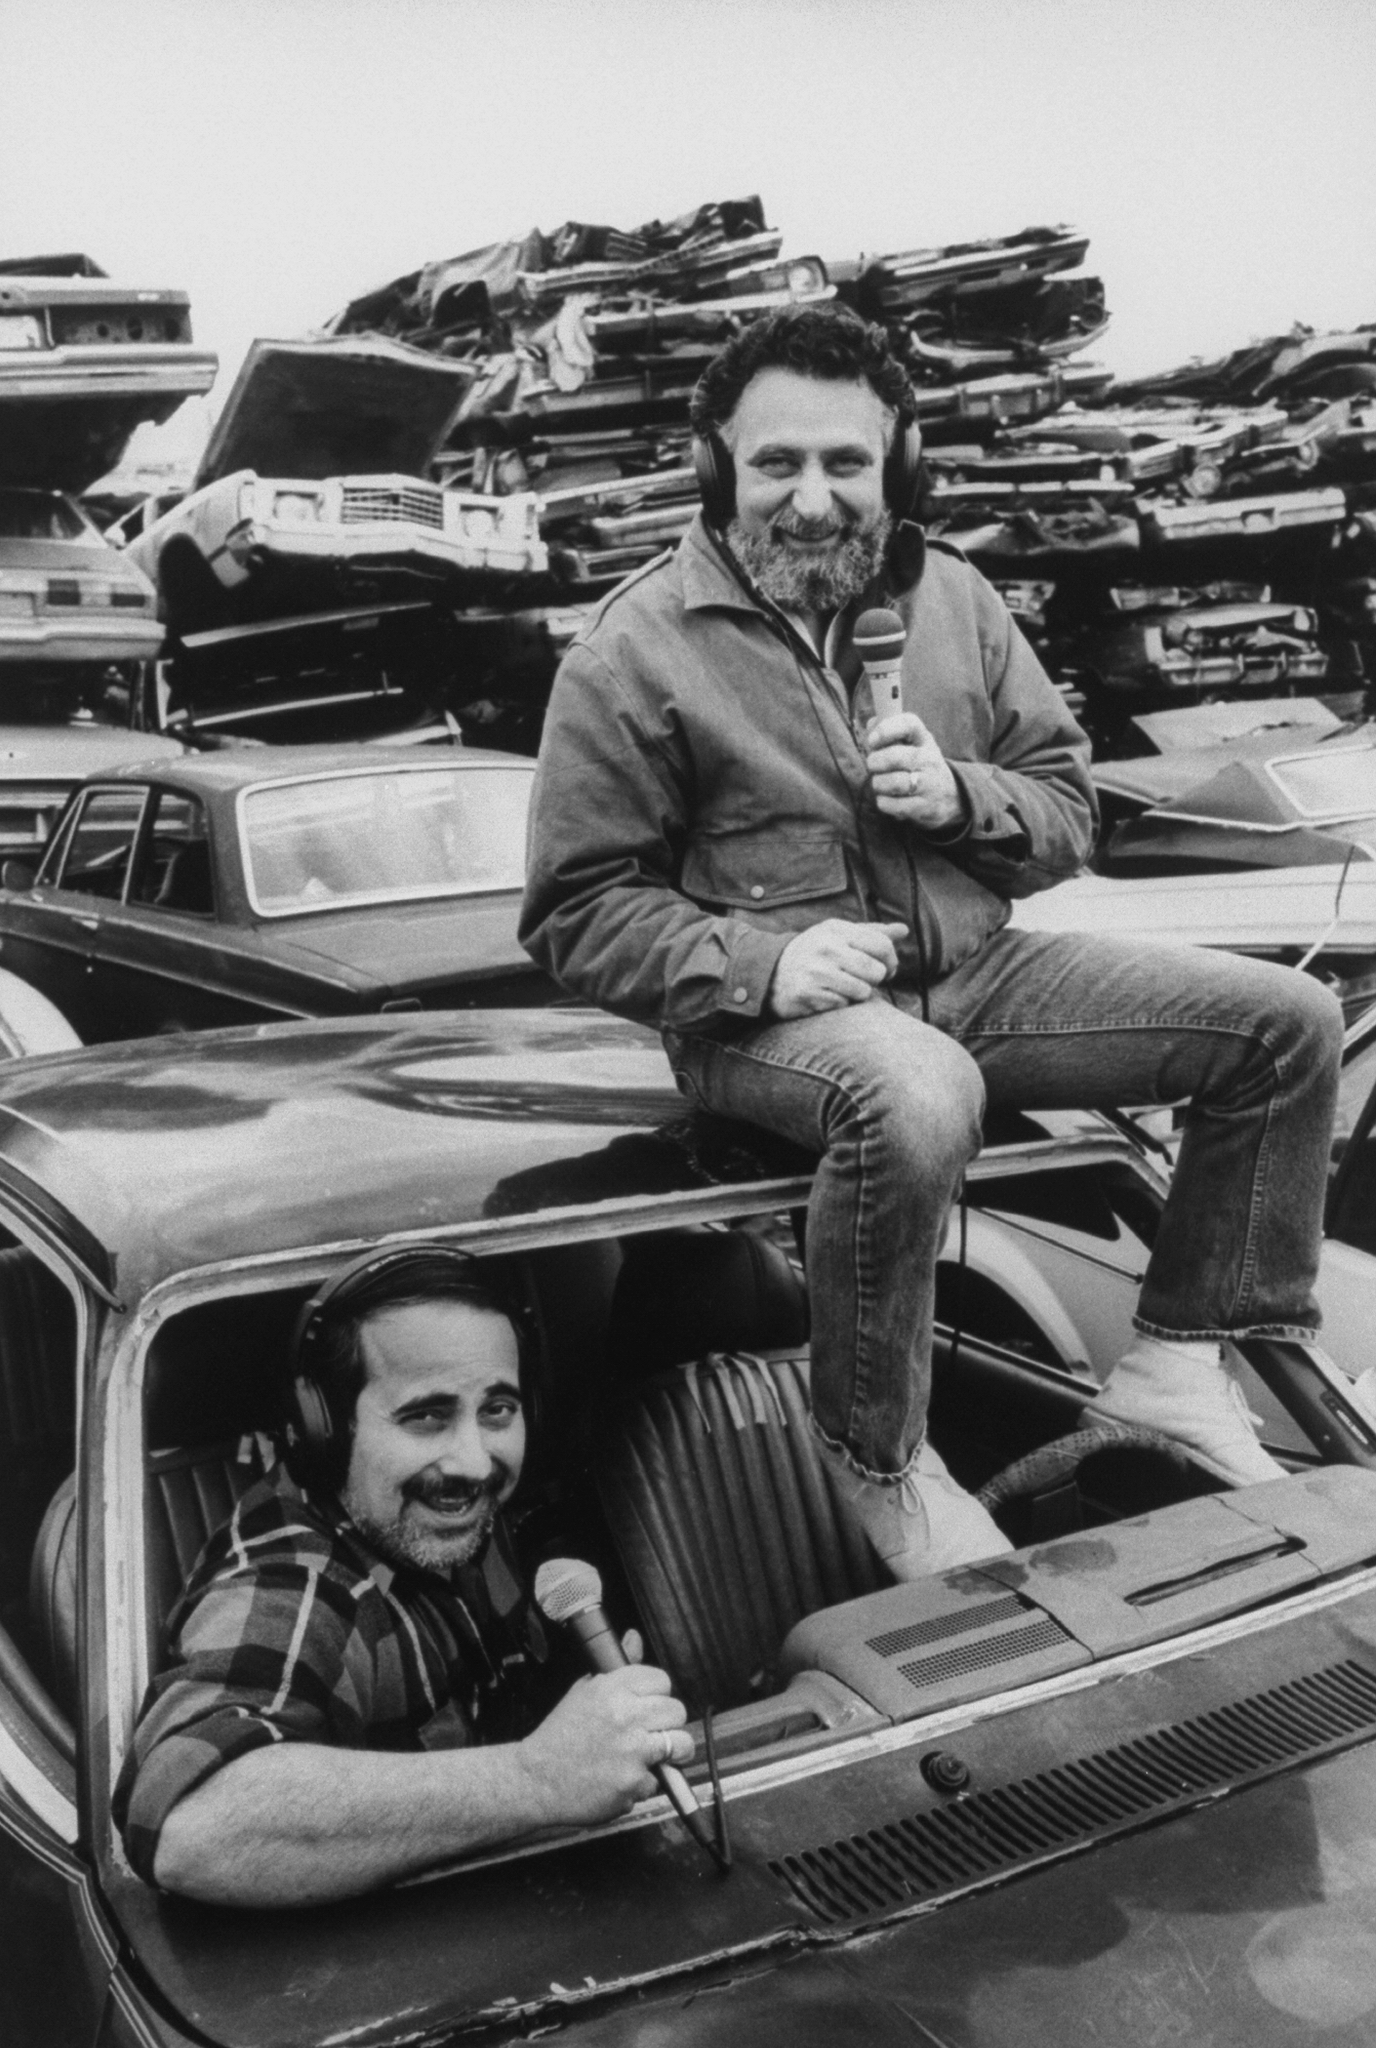 From Left: Ray Magliozzi and Tom Magliozzi car mechanics and radio talk show hosts for the show, Car Talk on WBUR-FM National Public Radio. (Richard Howard—The LIFE Images Collection/Getty Images)